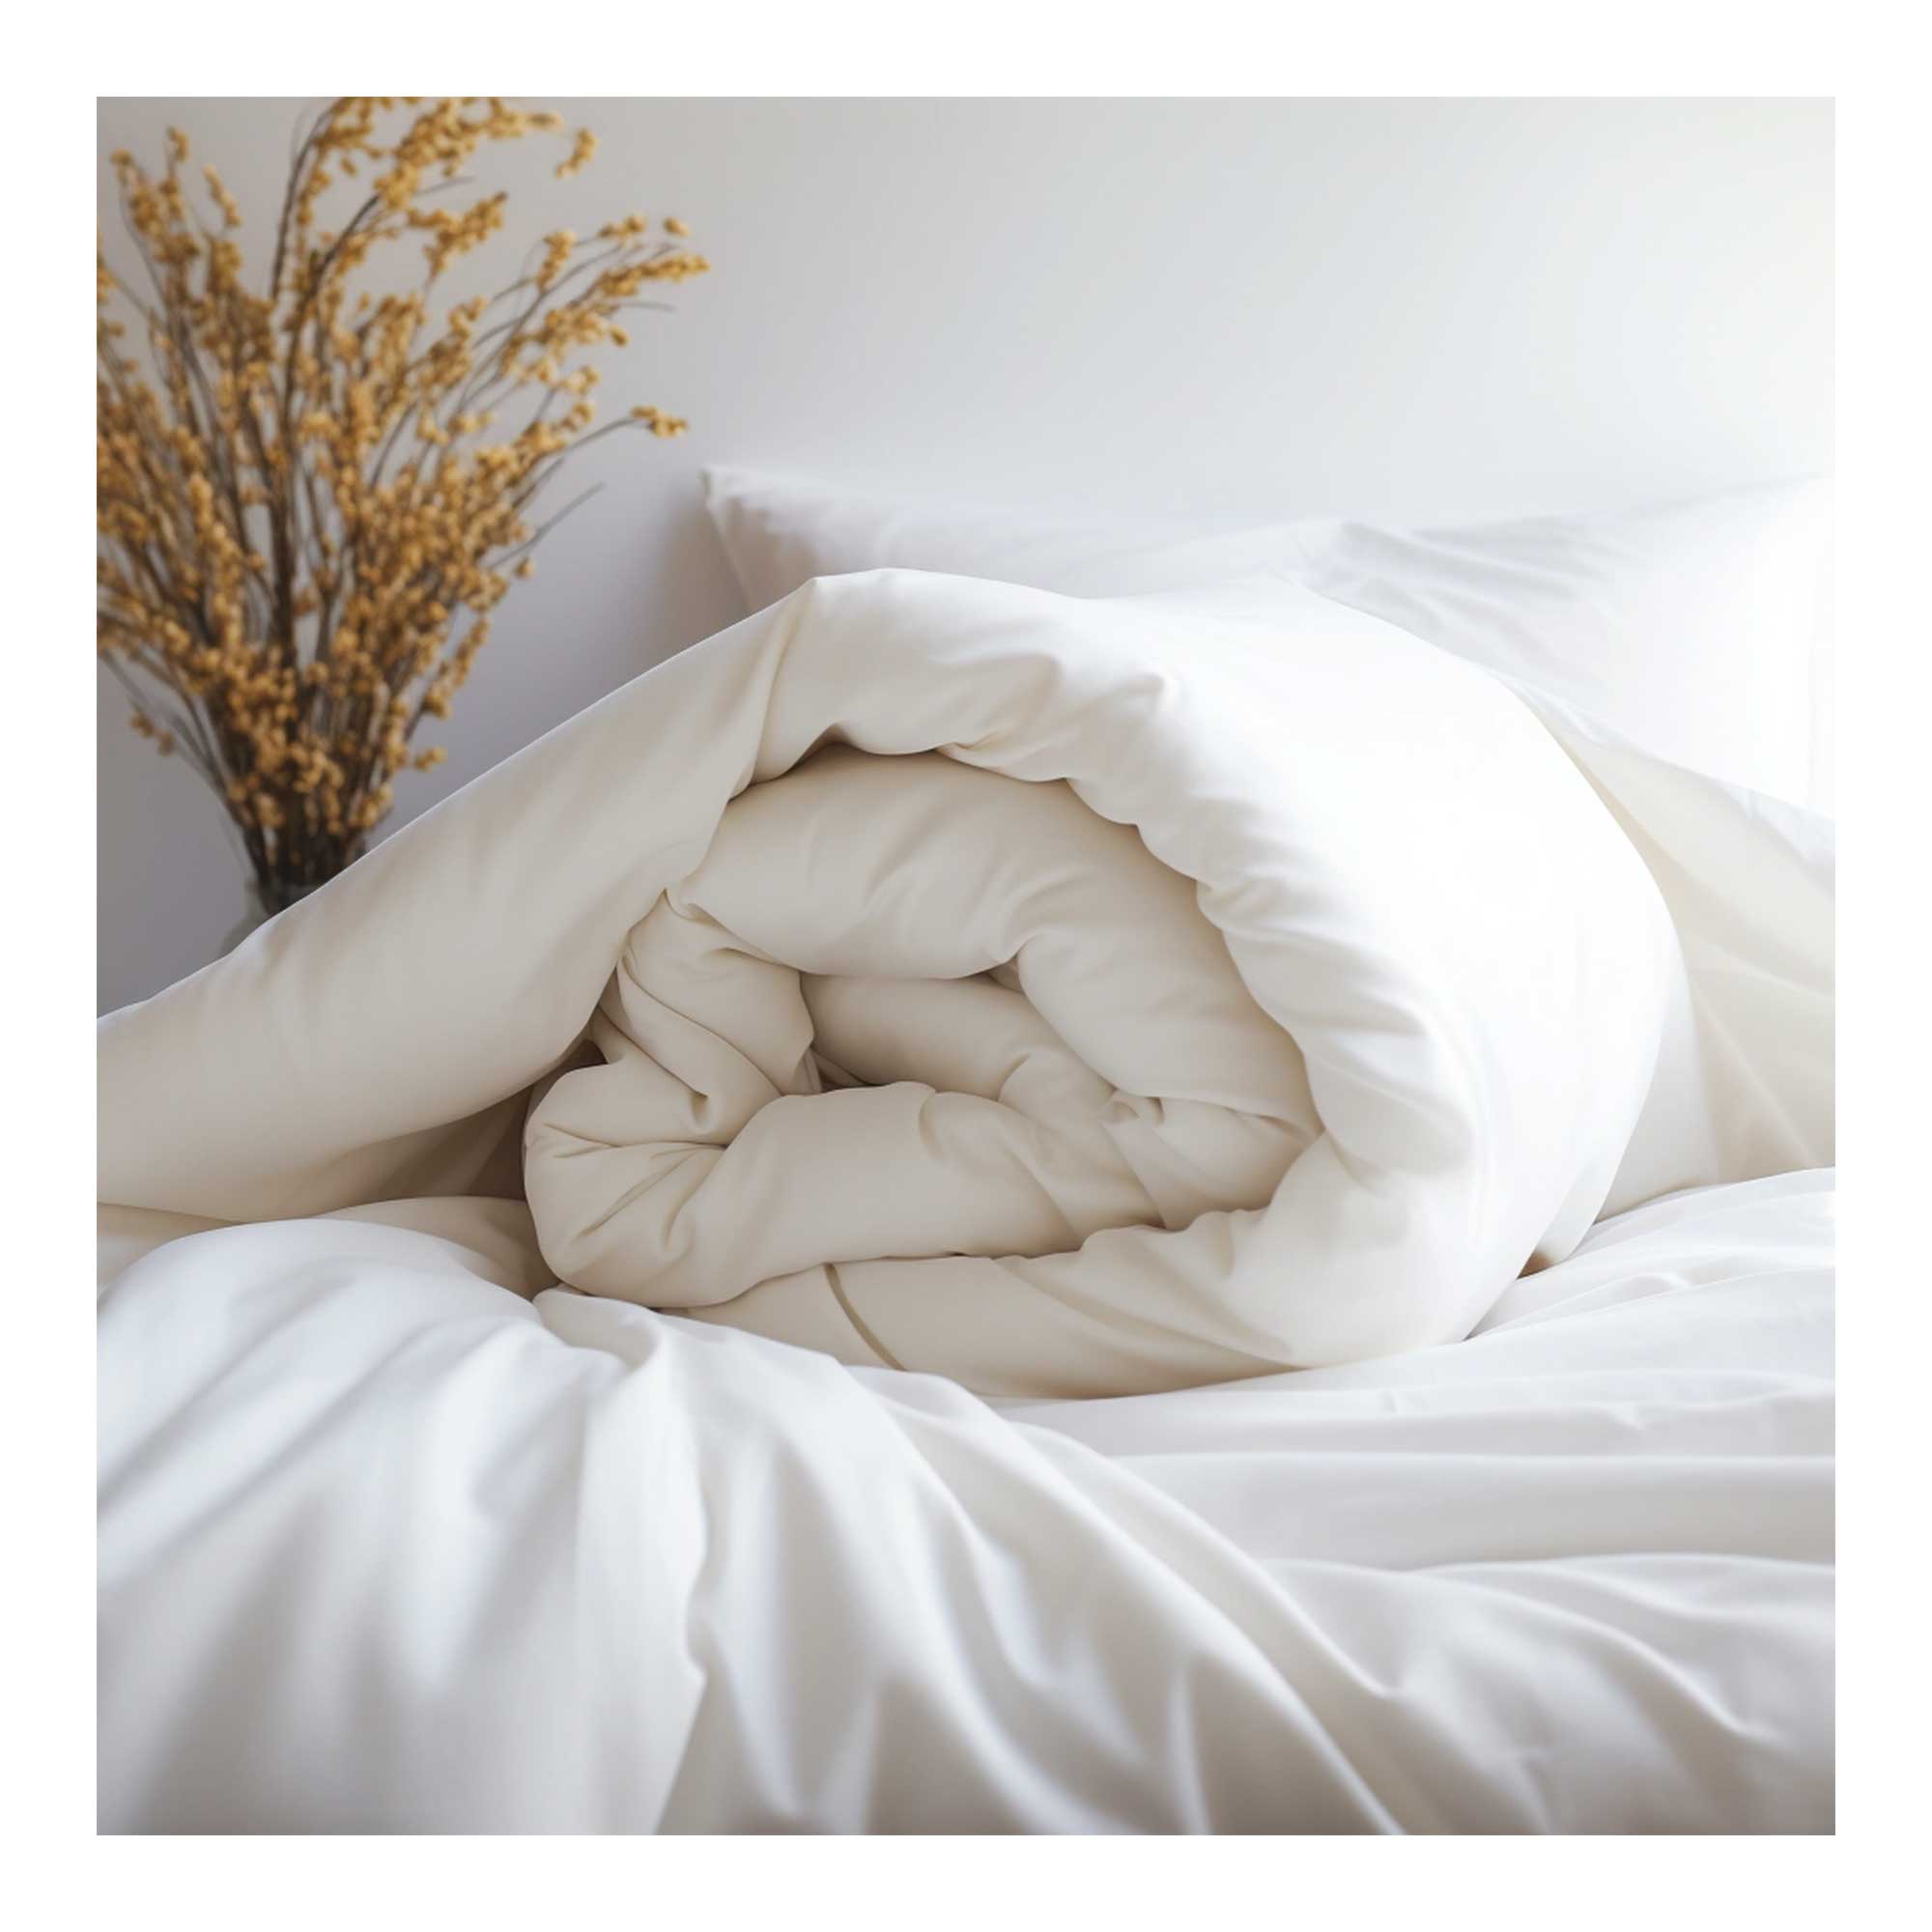 Devon Closewool wool duvet draped over a modern bed frame with soft lighting.